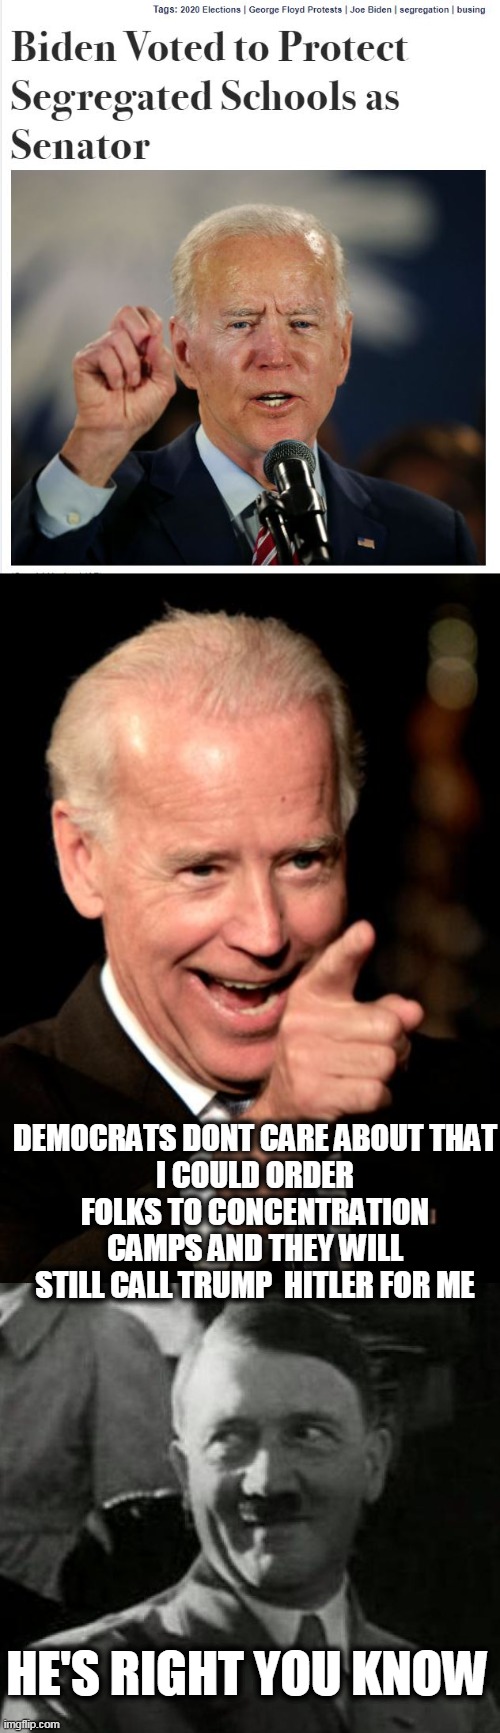 Irony |  DEMOCRATS DONT CARE ABOUT THAT
I COULD ORDER FOLKS TO CONCENTRATION CAMPS AND THEY WILL STILL CALL TRUMP  HITLER FOR ME; HE'S RIGHT YOU KNOW | image tagged in memes,smilin biden,hitler laugh | made w/ Imgflip meme maker